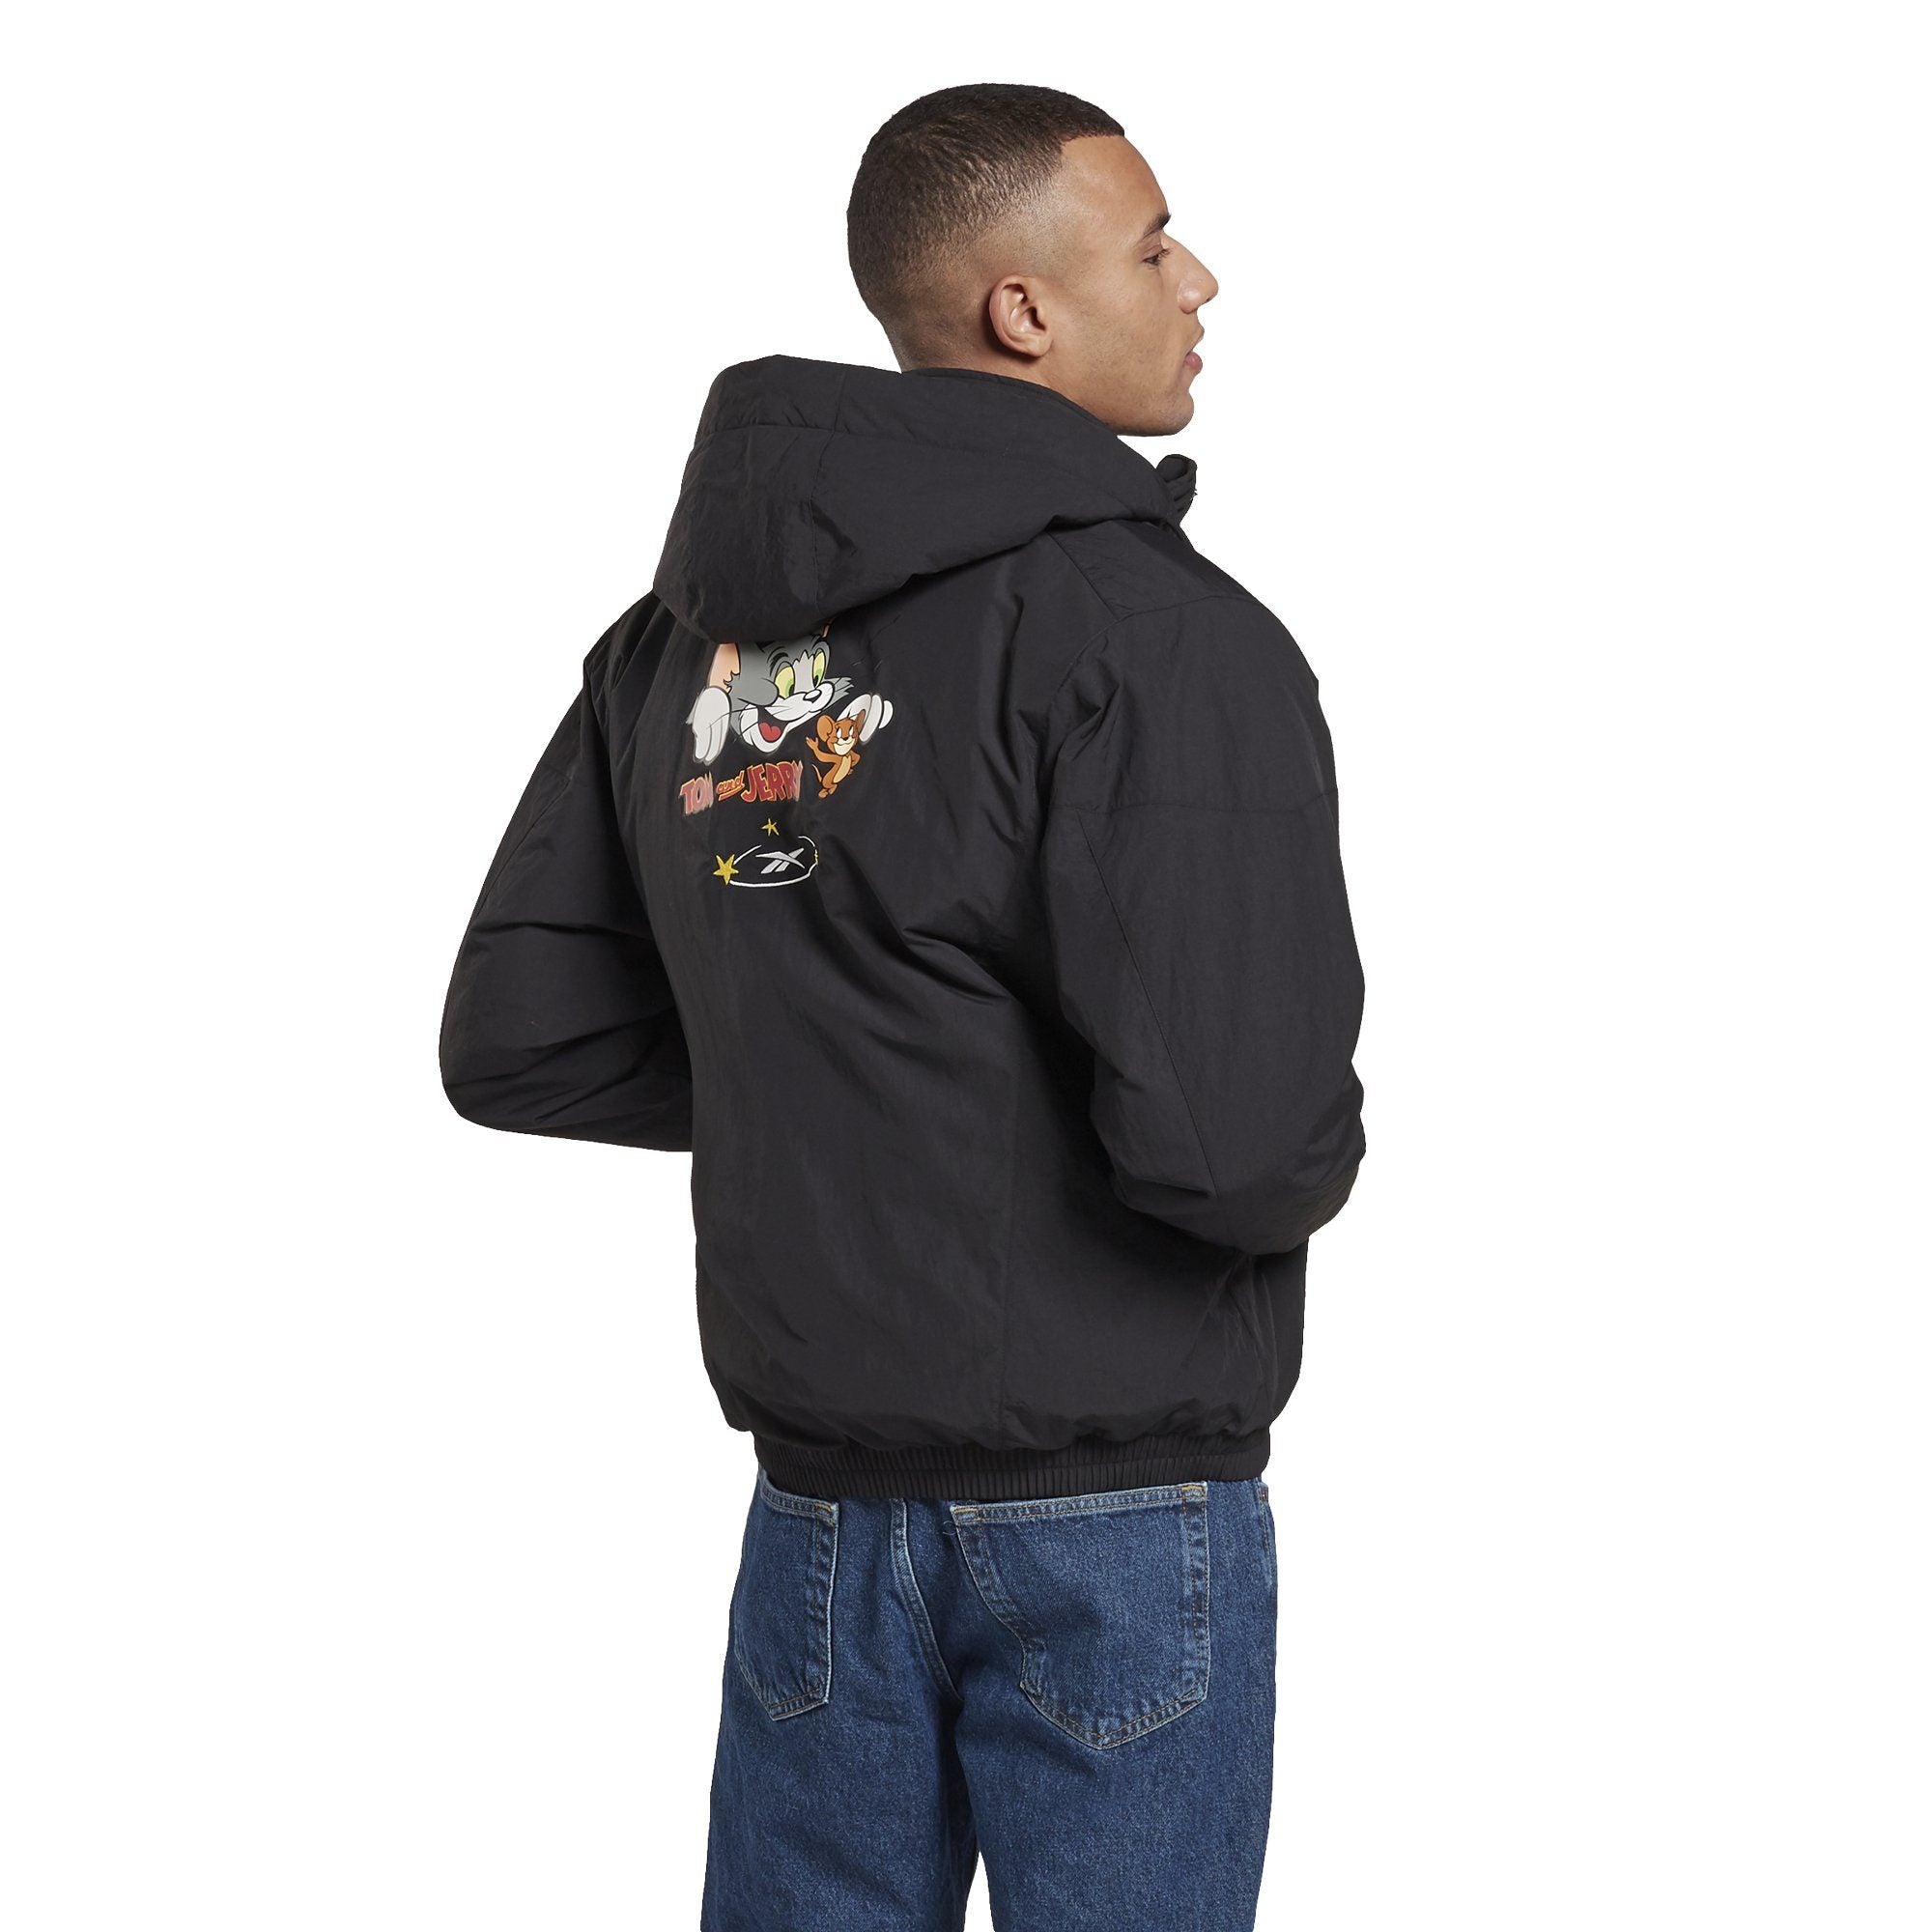 Reebok 'Tom and Jerry' printed jacket, Men's Clothing